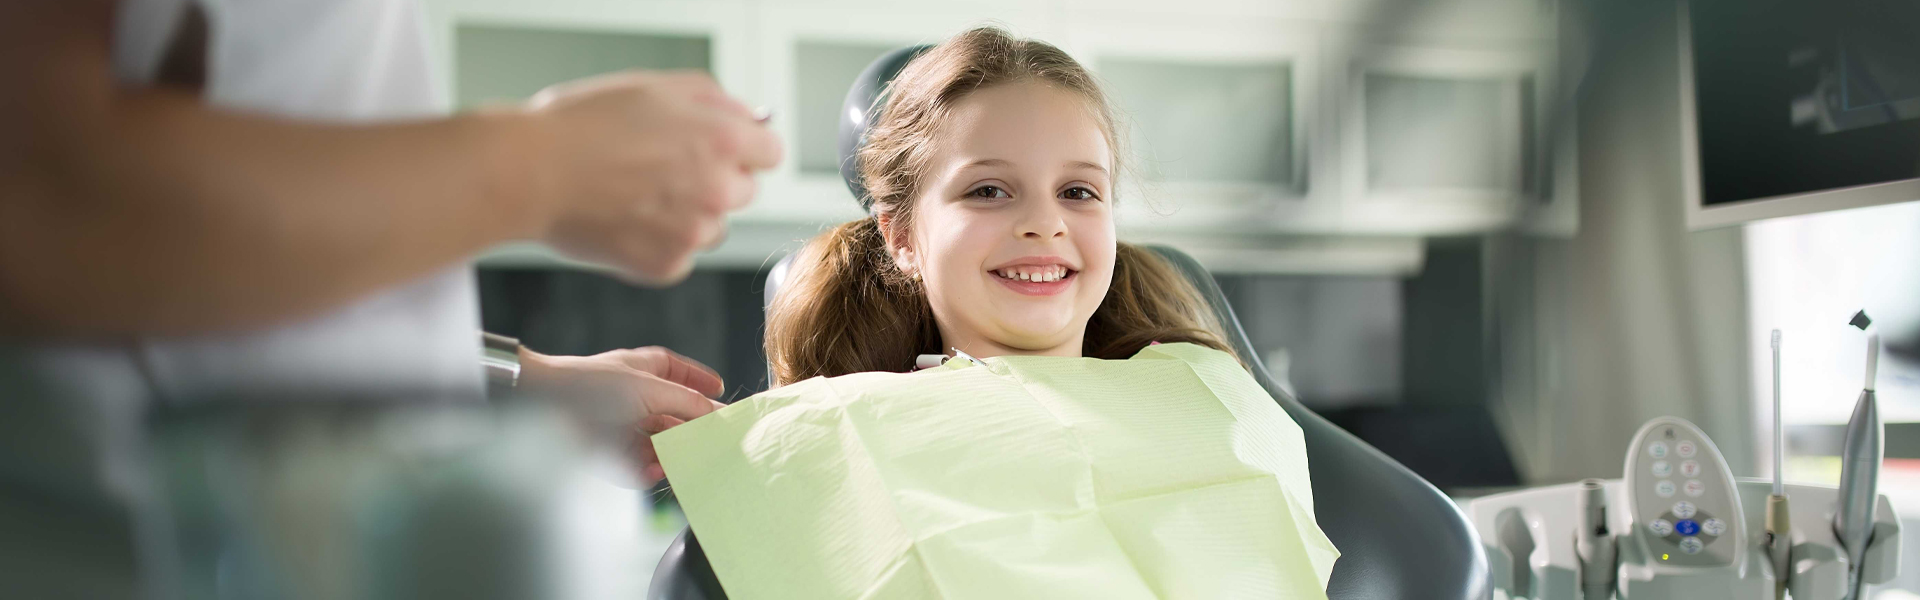 Children’s Pediatric Dentistry: How Does It Help Them?